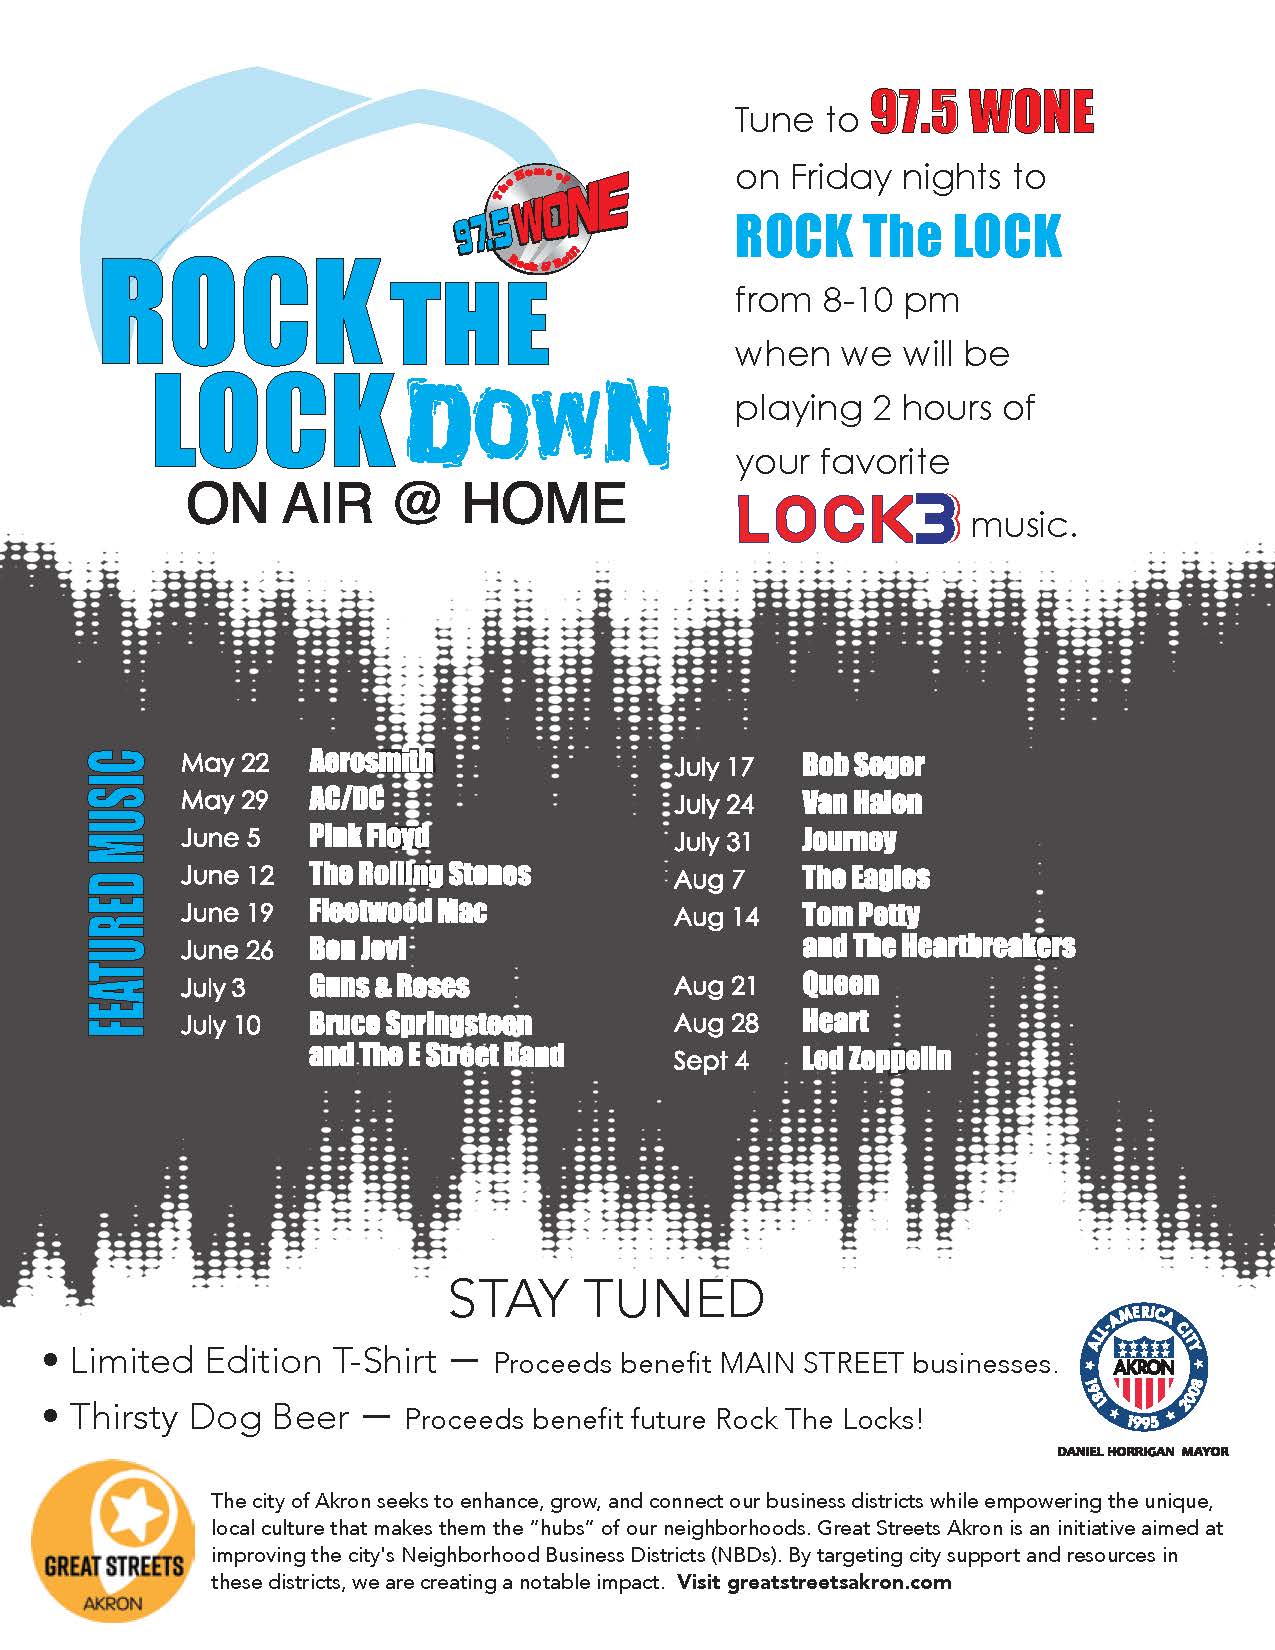 Rock the Lockdown Cover Photo